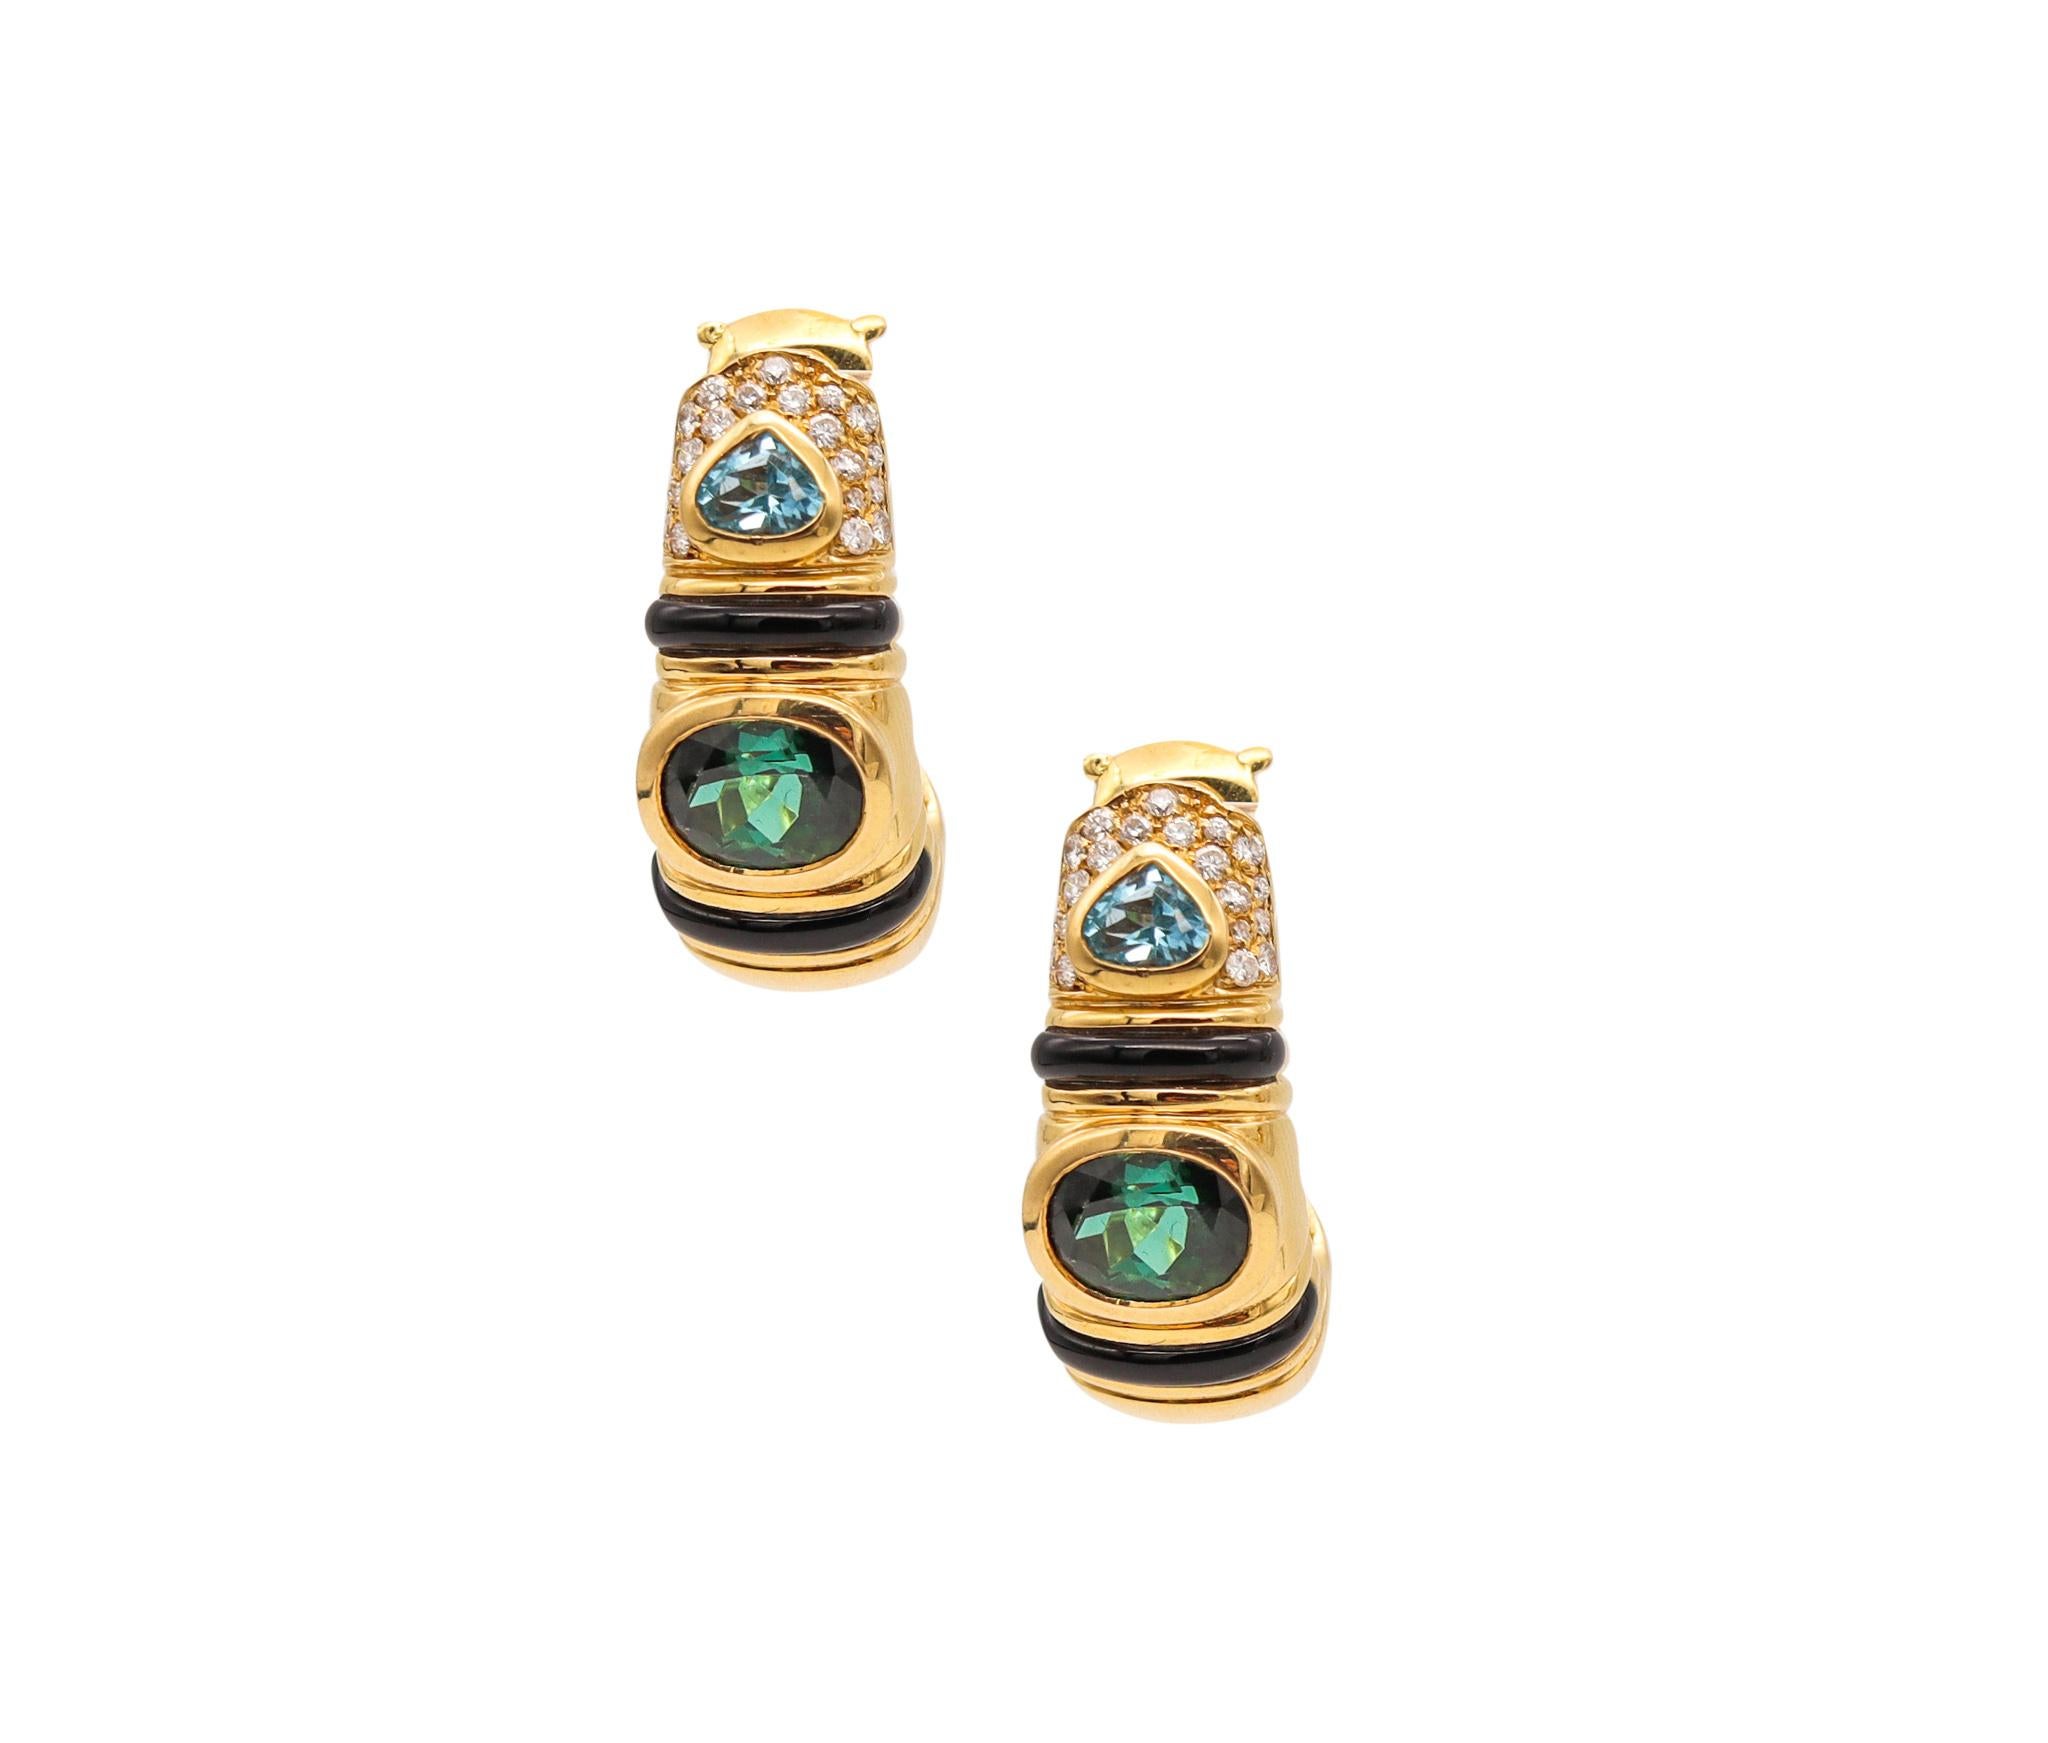 A pair of earrings designed by Marina B.

Elegant modern pieces, created in Milan Italy by the iconic jewelry house of Marina Bulgari. These pair of hoops earrings has been carefully crafted in solid yellow gold of 18 karats and suited with post